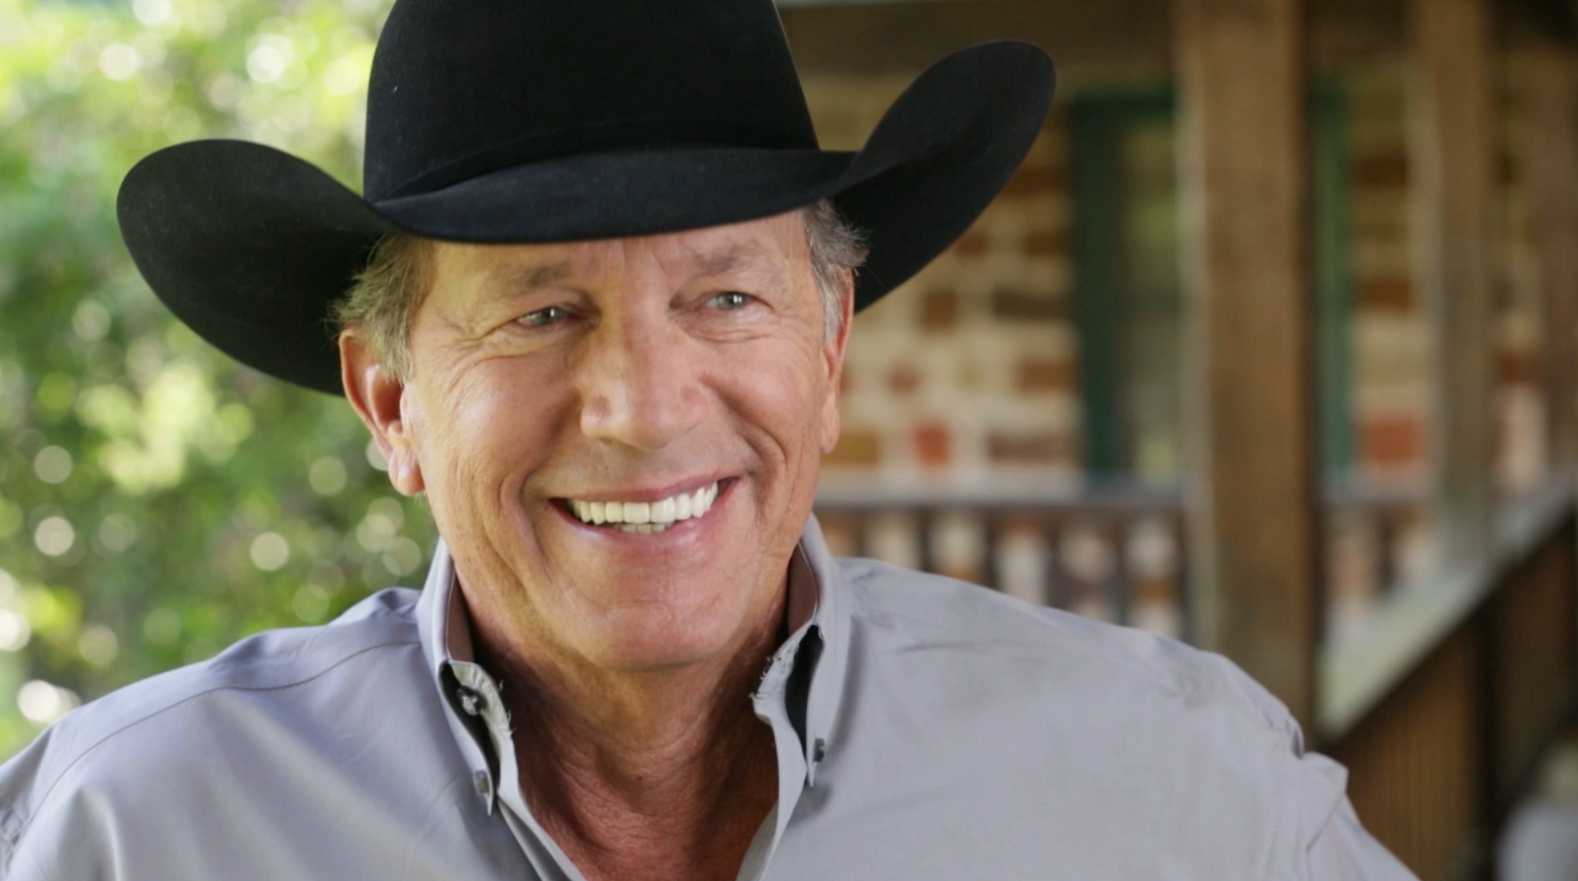 kens5.com | George Strait honored as 'Texan of the Year'